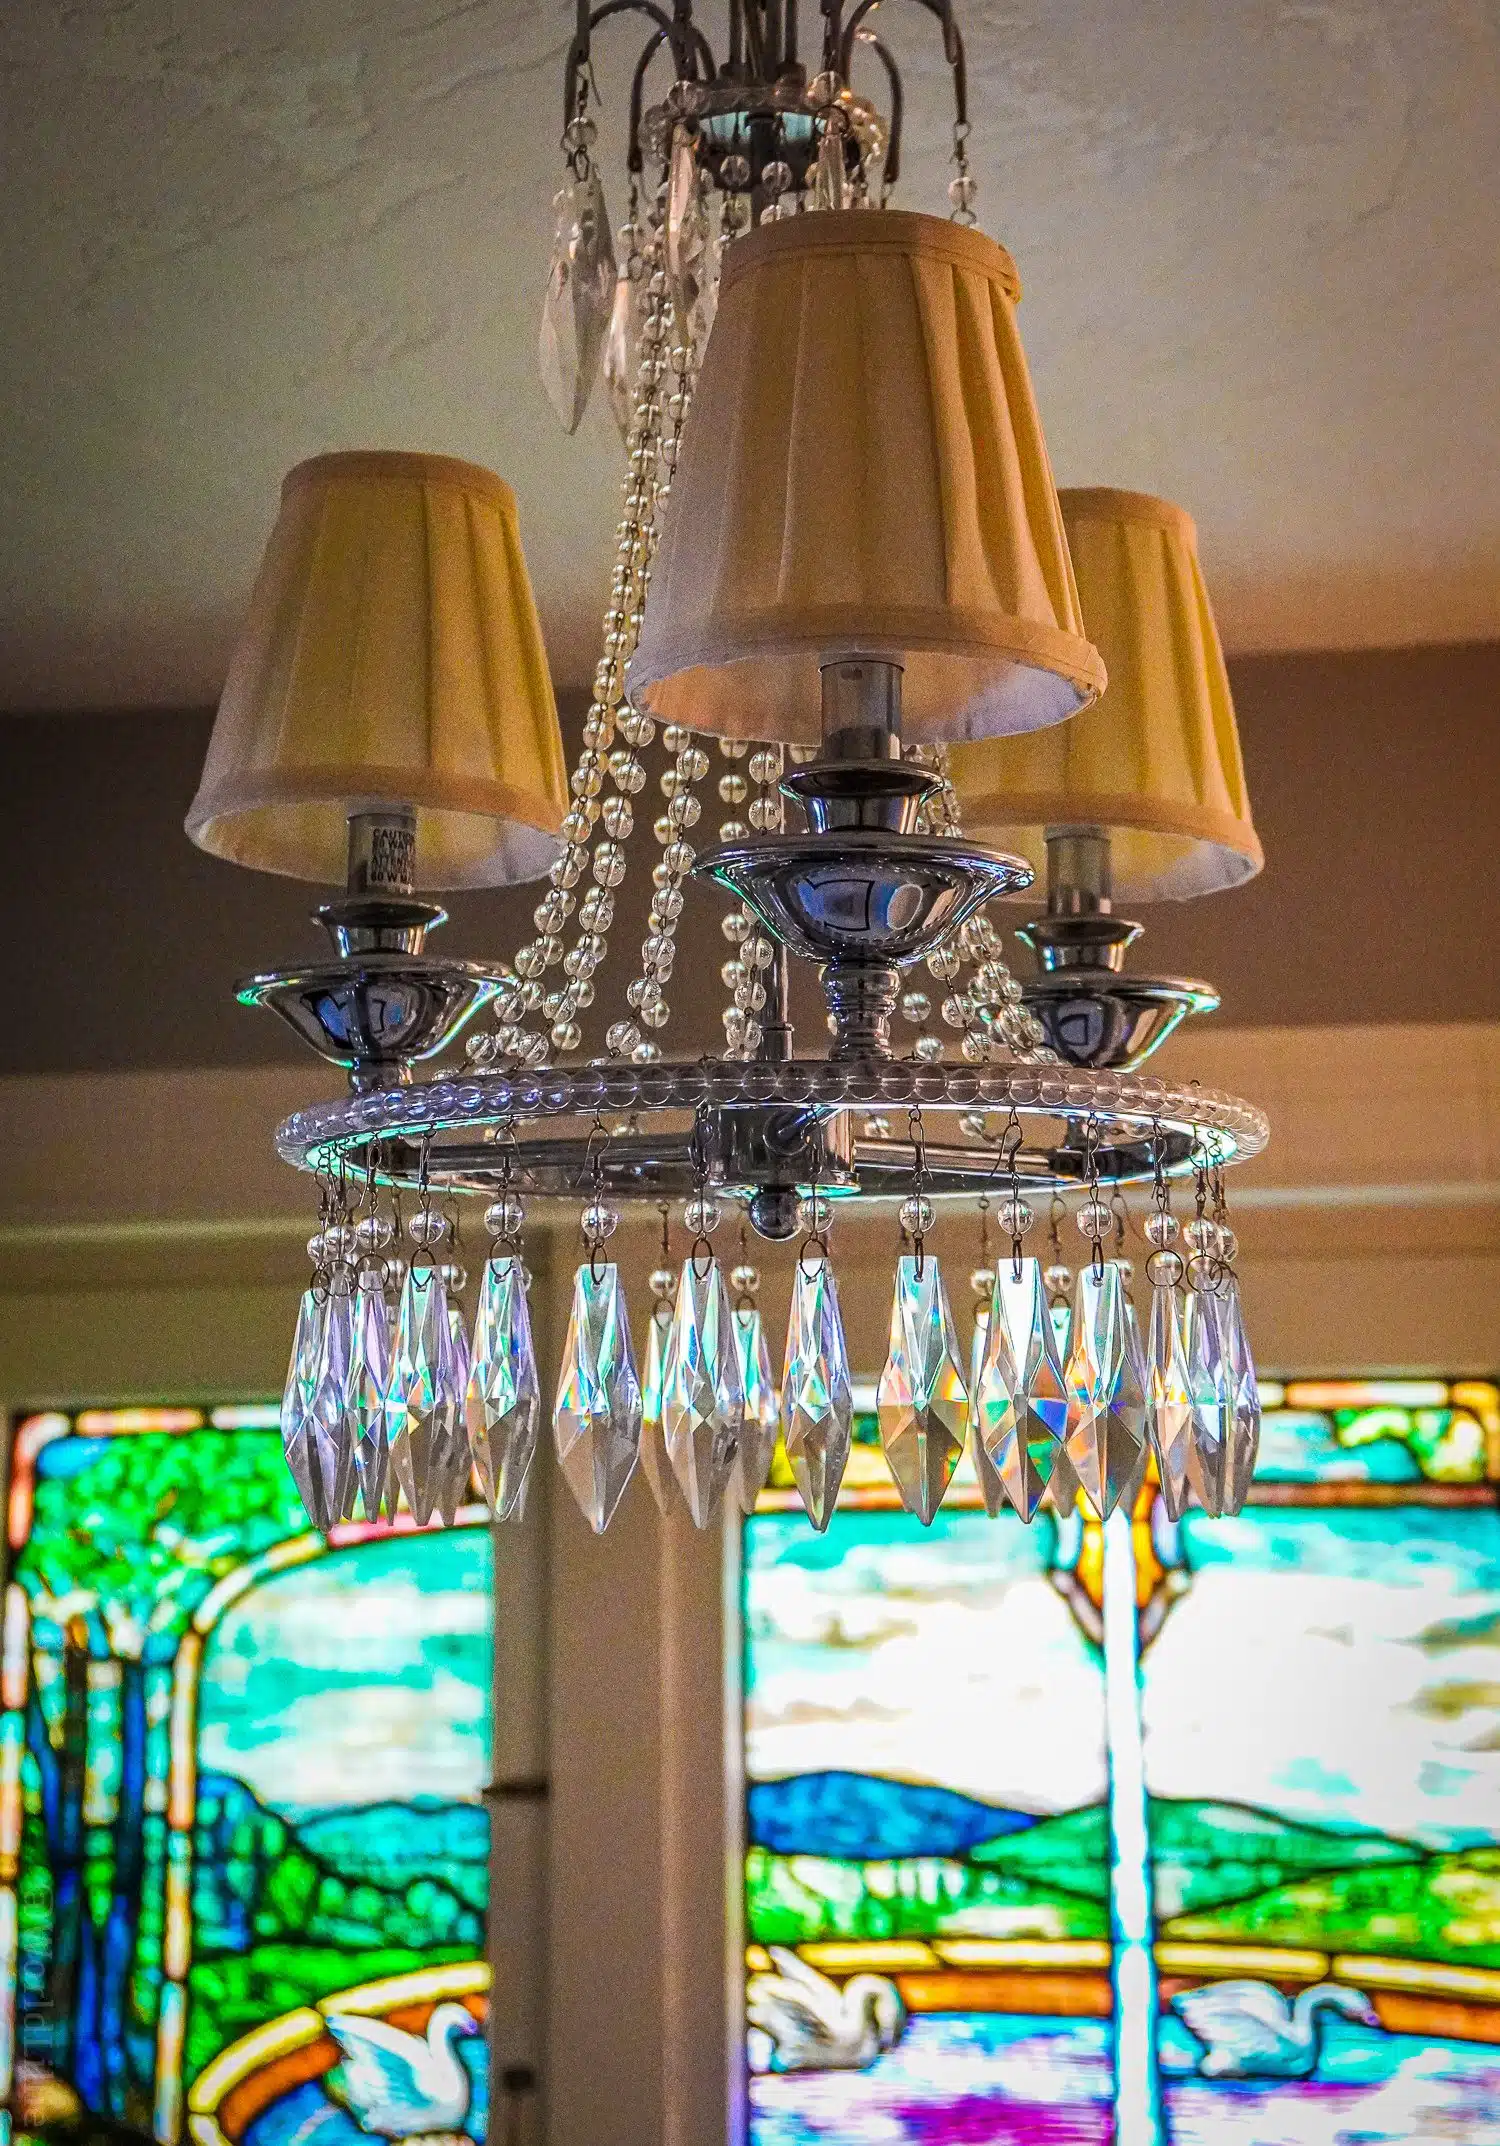 Stained glass and chandelier... in our hotel bathroom!